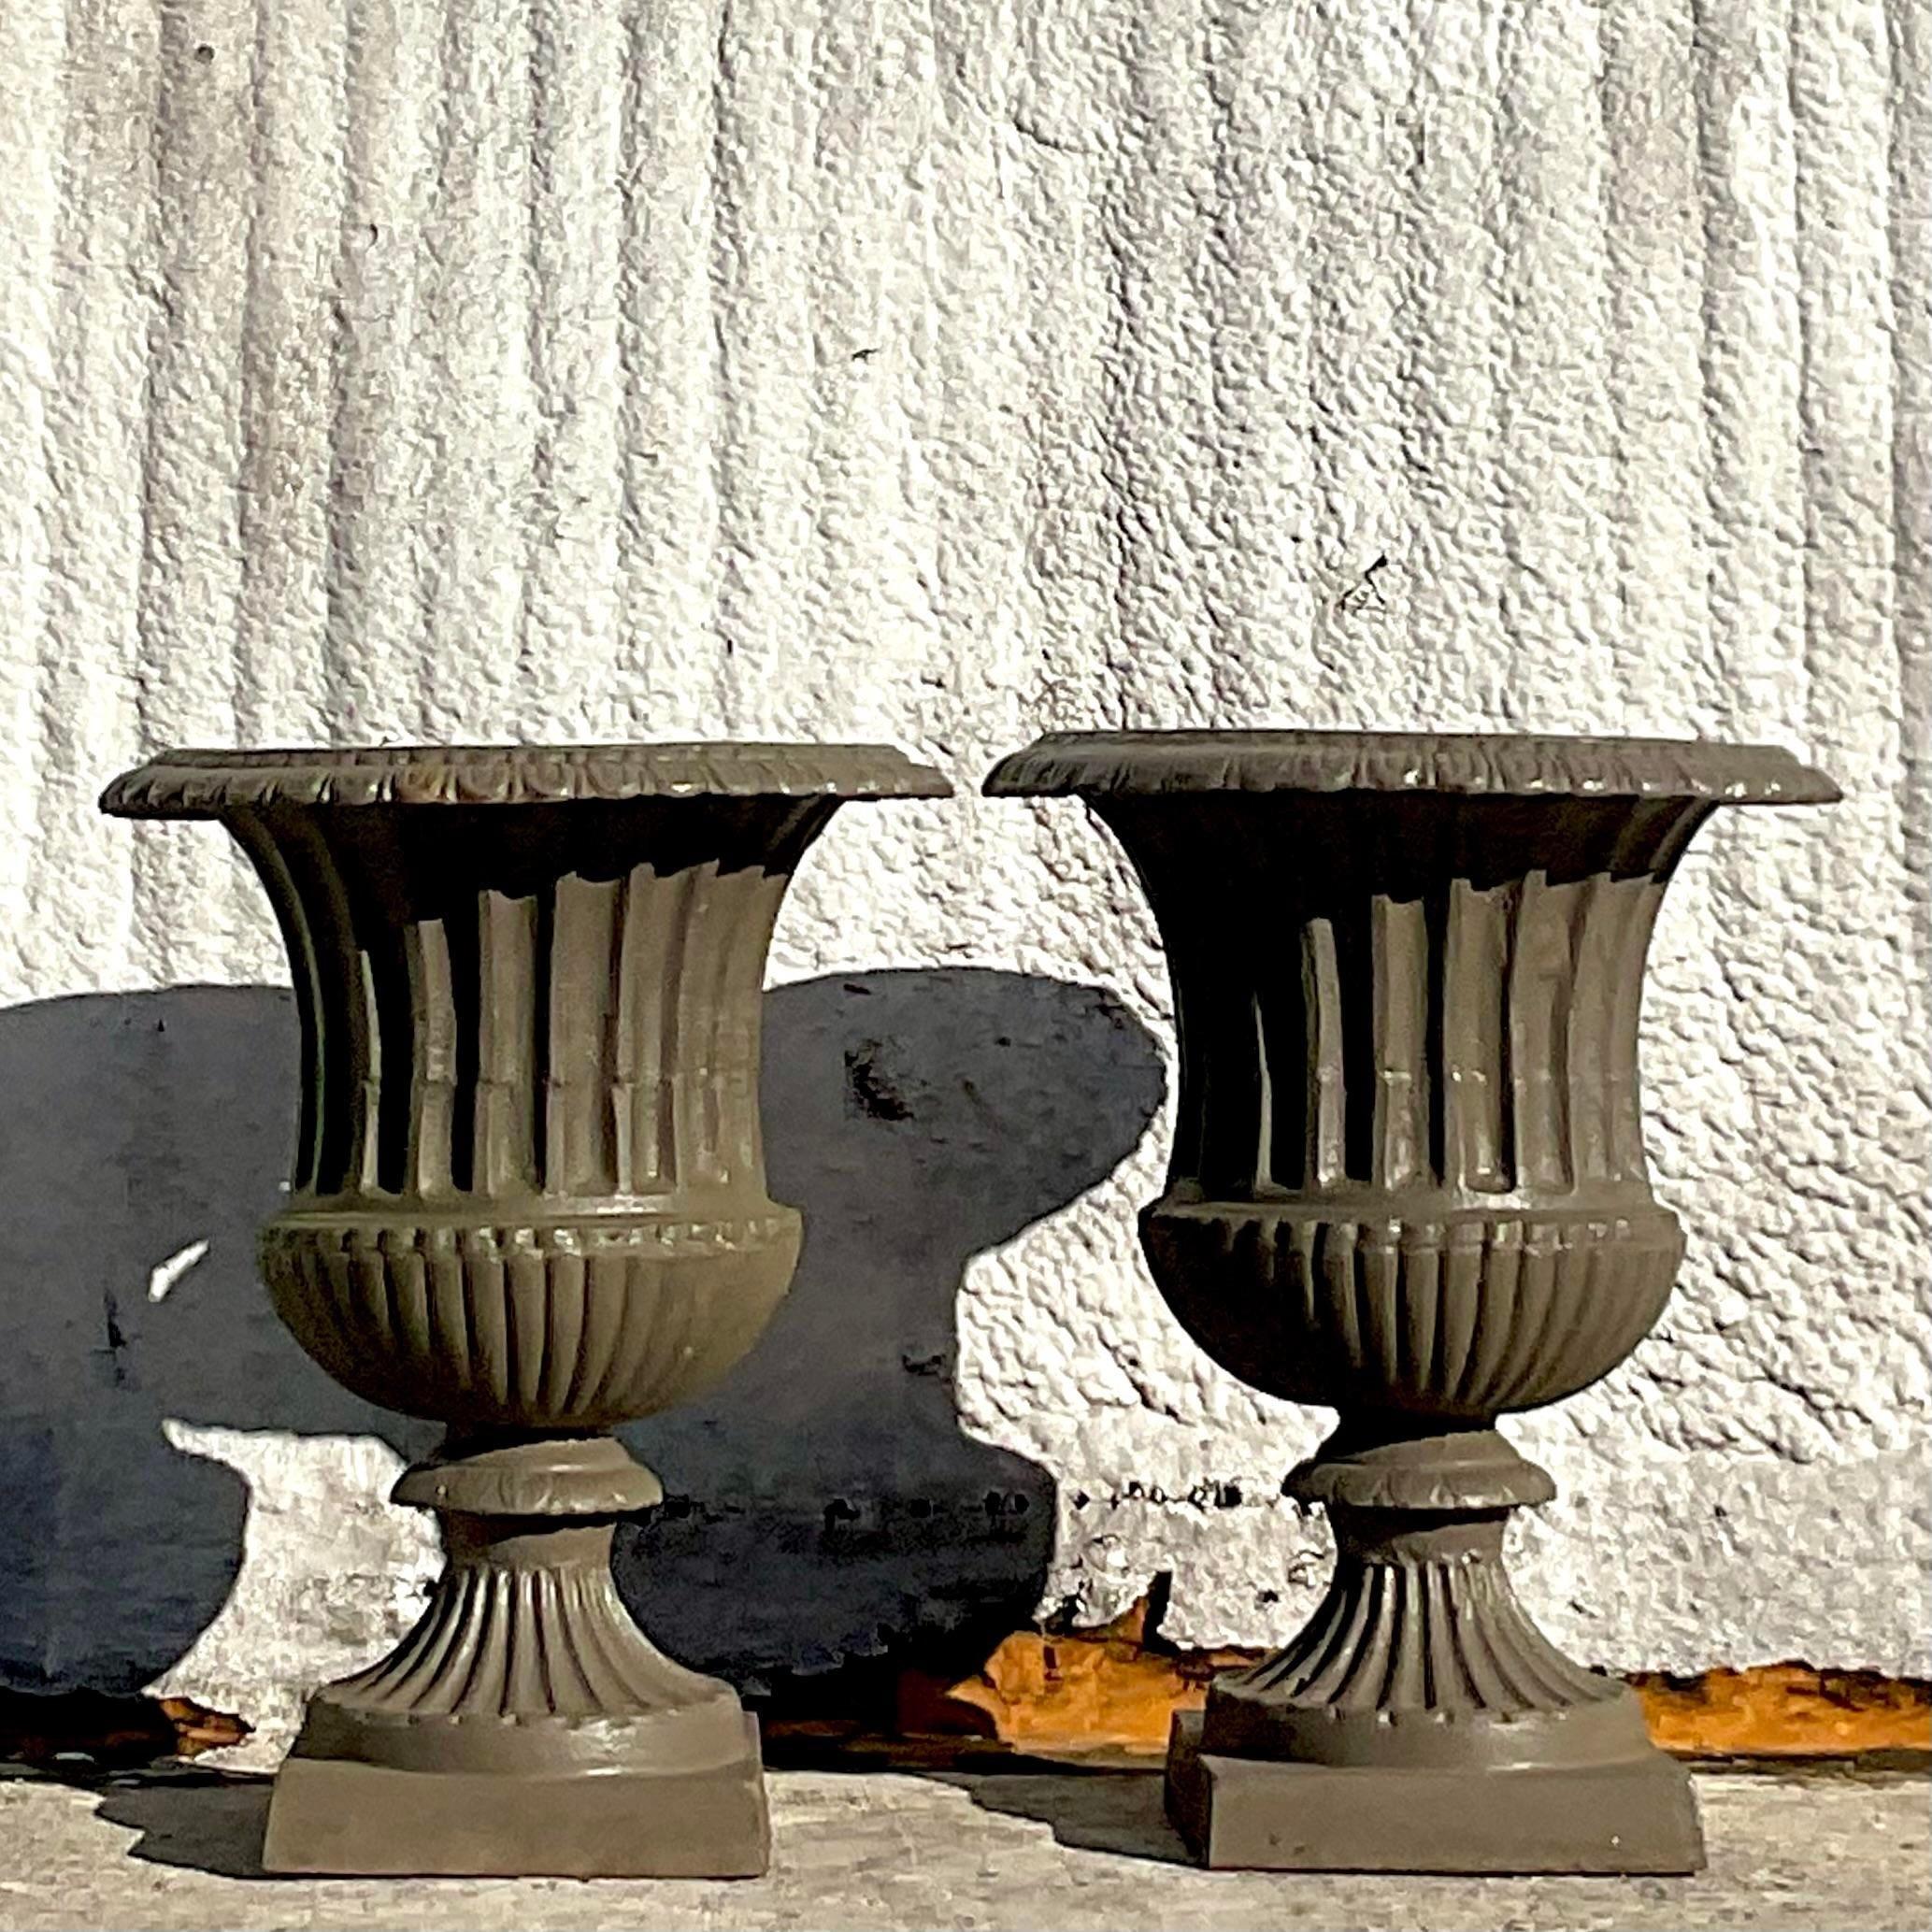 Vintage Mid 20th Century Boho Wrought Iron Urns - a Pair For Sale 2